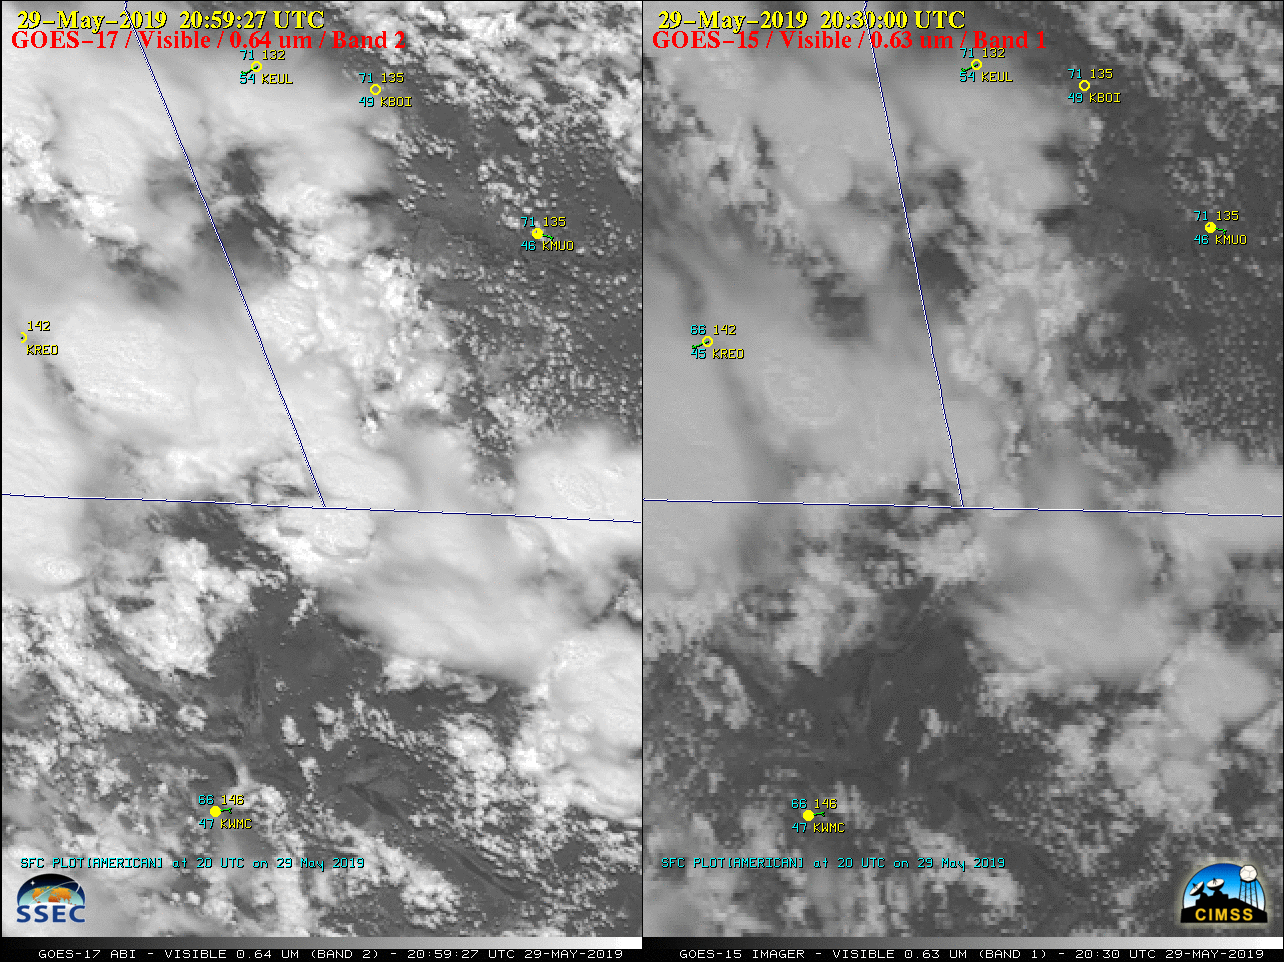 GOES-17 “Red” Visible (0.64 µm, left) and GOES-15 Visible (0.63 µm, right) images, with hourly plots of surface reports [click to play MP4 animation]